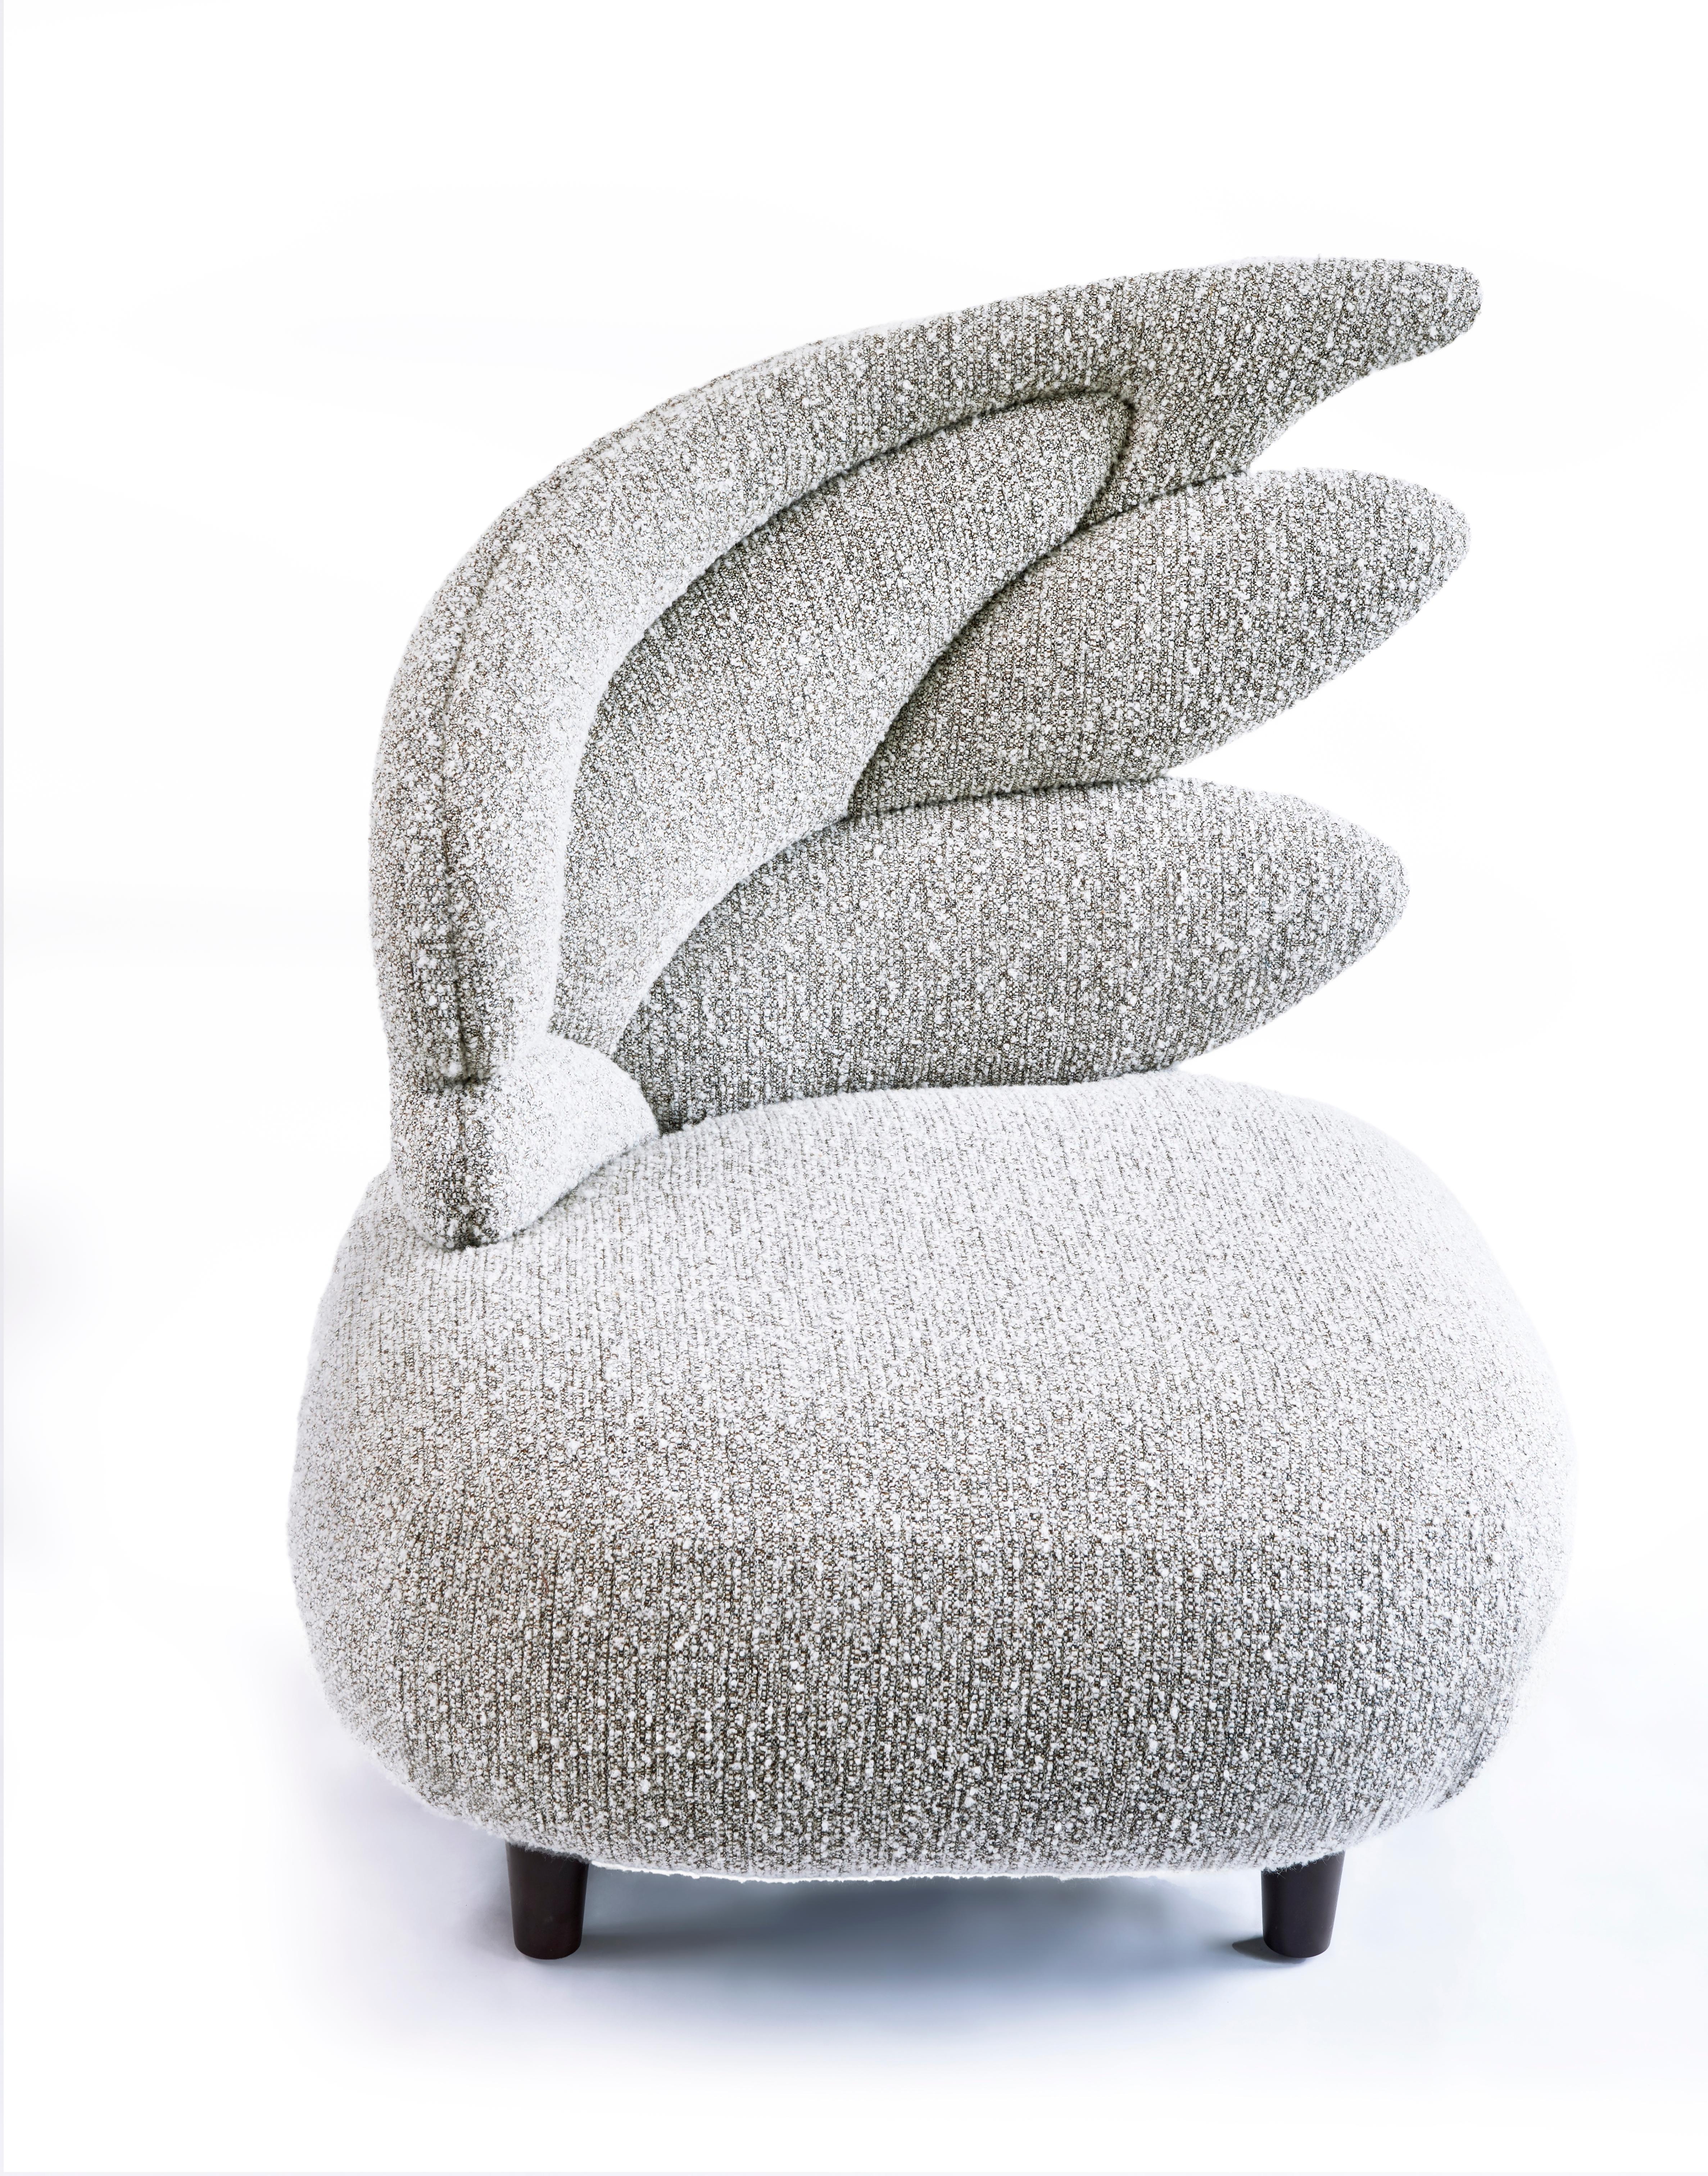 Zeus Grey Armchair by Emilie Lemardeley
Limited Edition of 24 pieces.
Dimensions: Ø 80 x H 100 cm
Materials: Wood, foam and Pierre Frey fabric.

Designed as jewellery for the interior, the Lemardeley’s creations reflect French craftsmanship infused